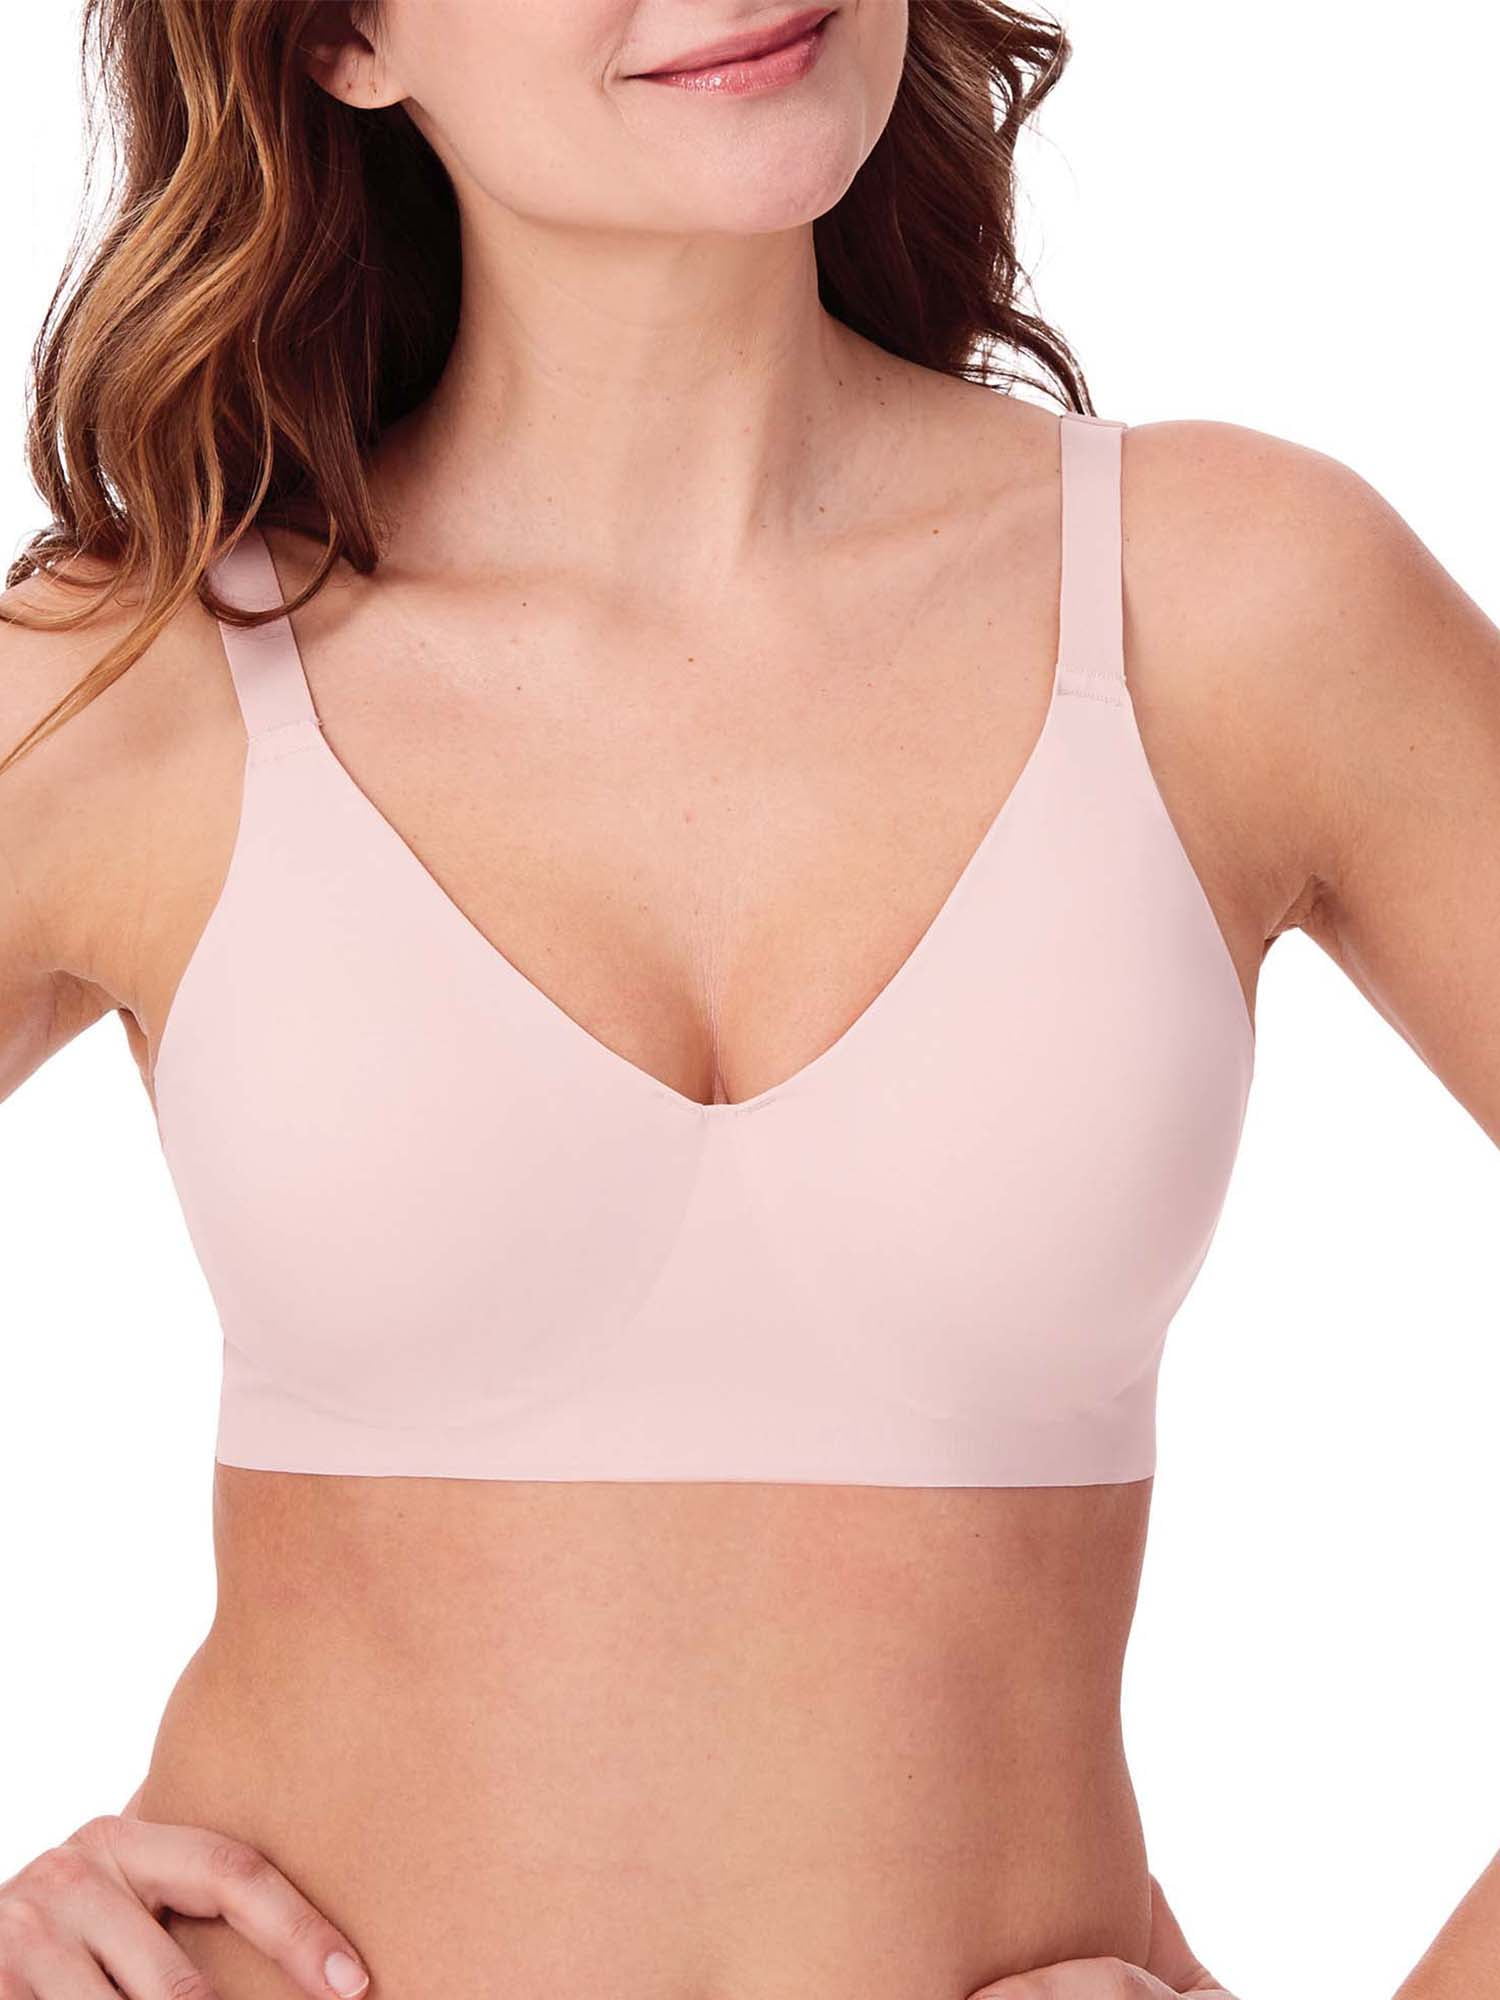 Aailsa Comfy Revolution Front-Close Bra Reviews 2023 - All Truth